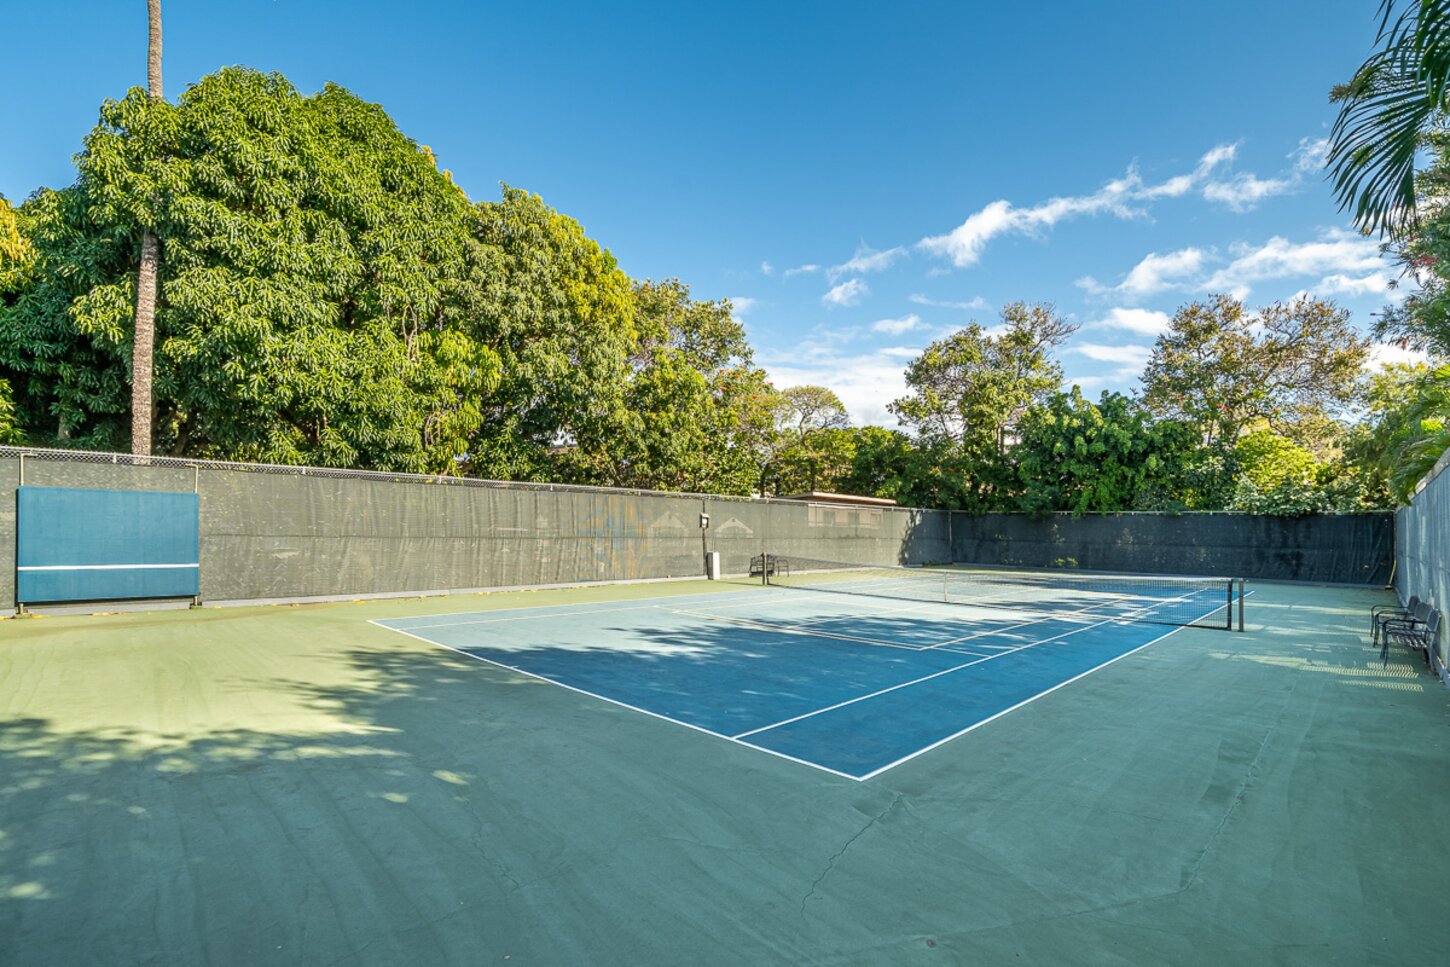 Tennis/Pickle ball Anyone? Right on Property!